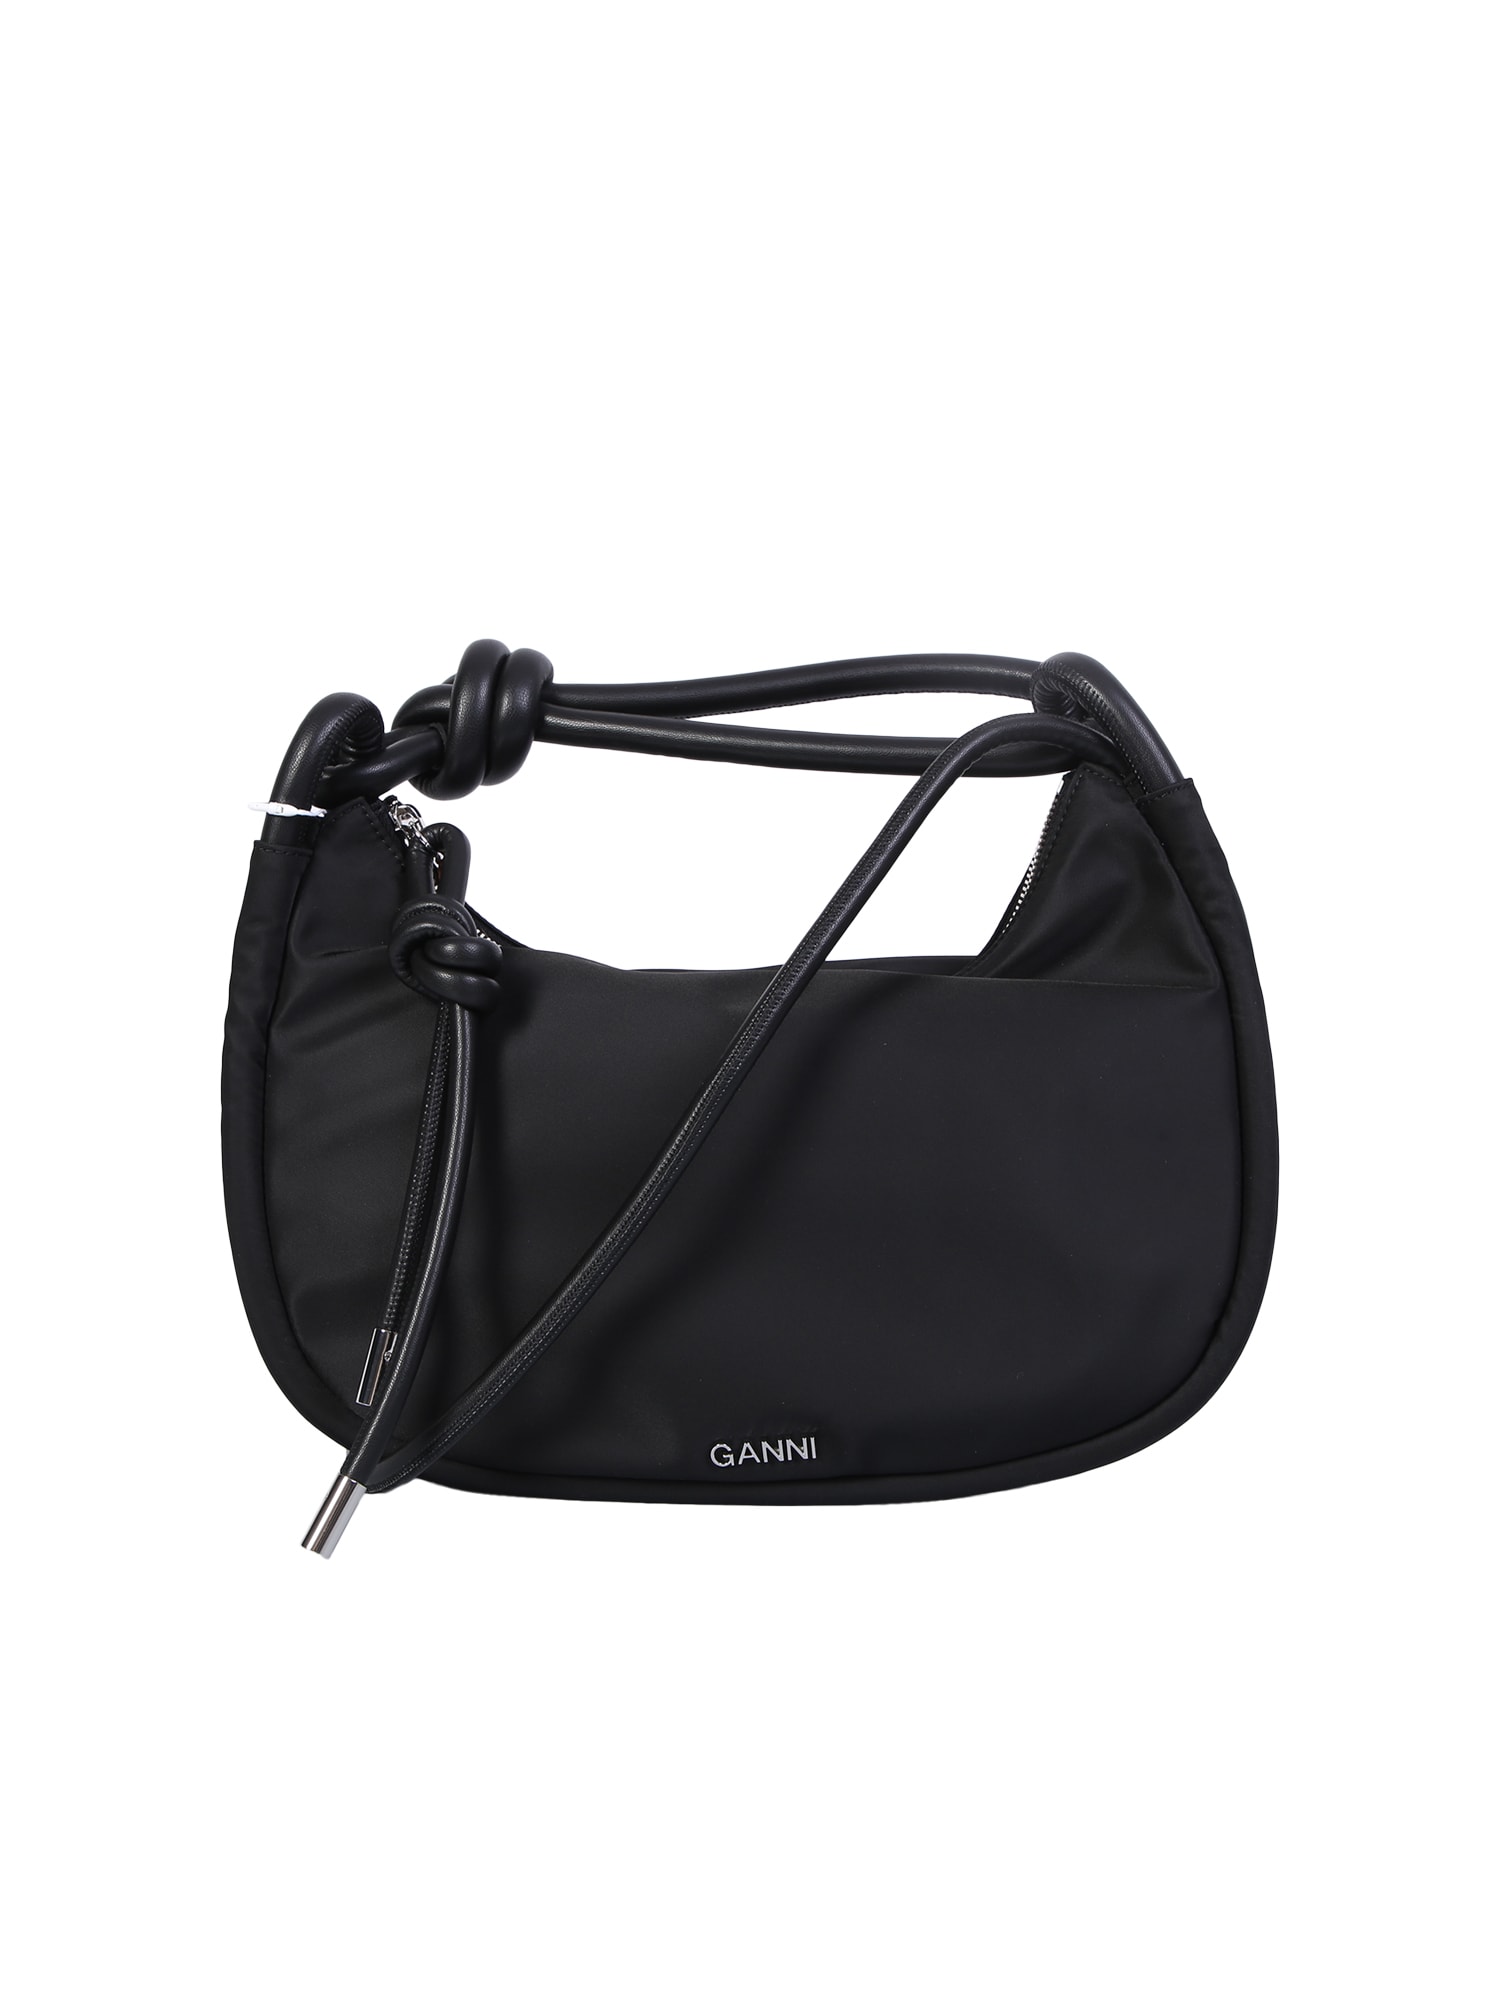 Ganni Knotted Top Handle Bag In Black | ModeSens